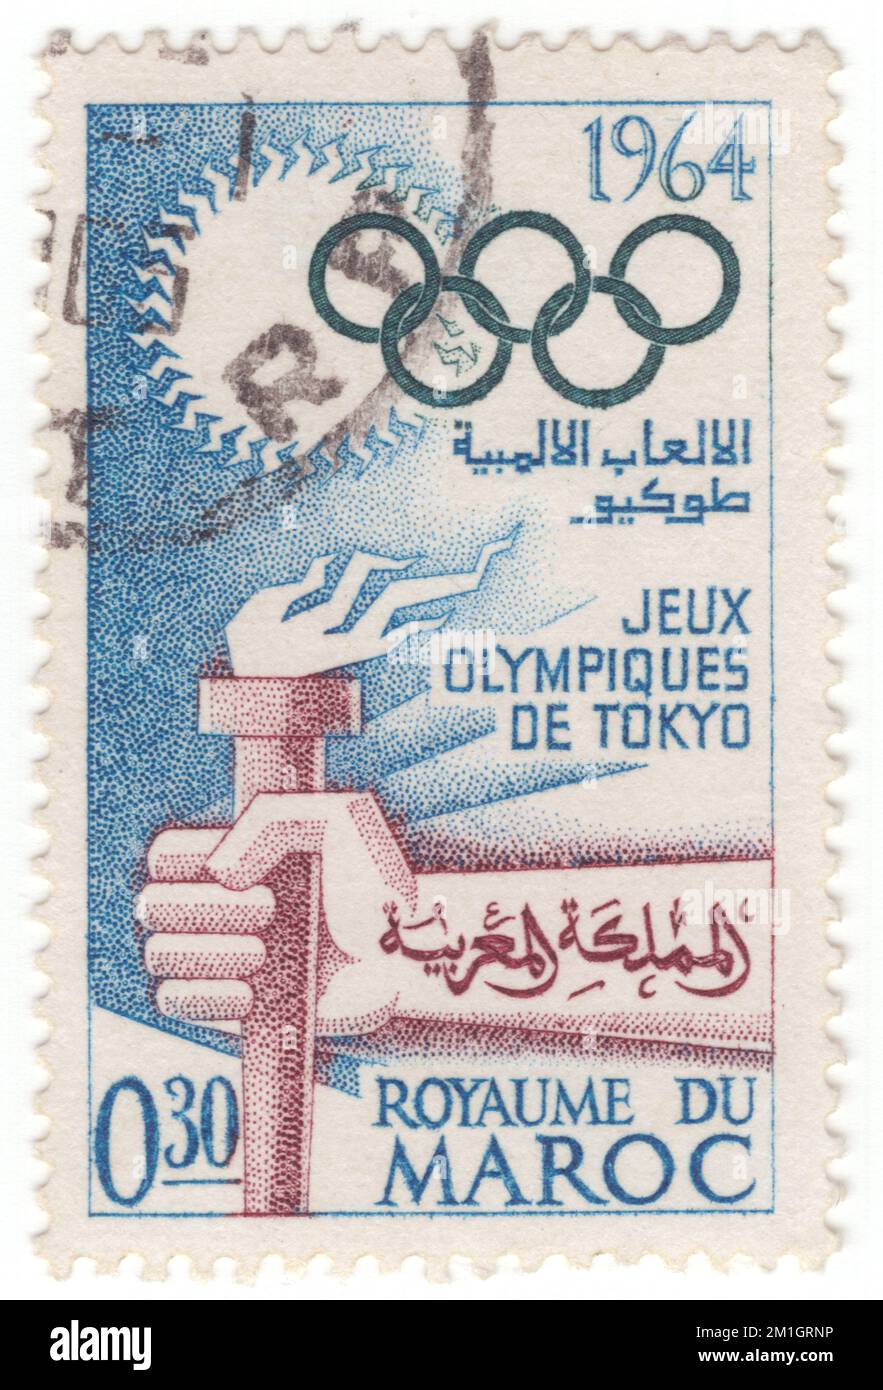 MOROCCO - 1964 September 22: An 30 centimes blue, dark green and red-brown postage stamp depicting Olympic Torch. 18th Olympic Games, Tokyo, October 10-25. The 1964 Summer Olympics, officially the Games of the XVIII Olympiad and commonly known as Tokyo 1964, were an international multi-sport event held from 10 to 24 October 1964 in Tokyo, Japan. Tokyo had been awarded the organization of the 1940 Summer Olympics, but this honor was subsequently passed to Helsinki due to Japan's invasion of China, before ultimately being cancelled due to World War II Stock Photo